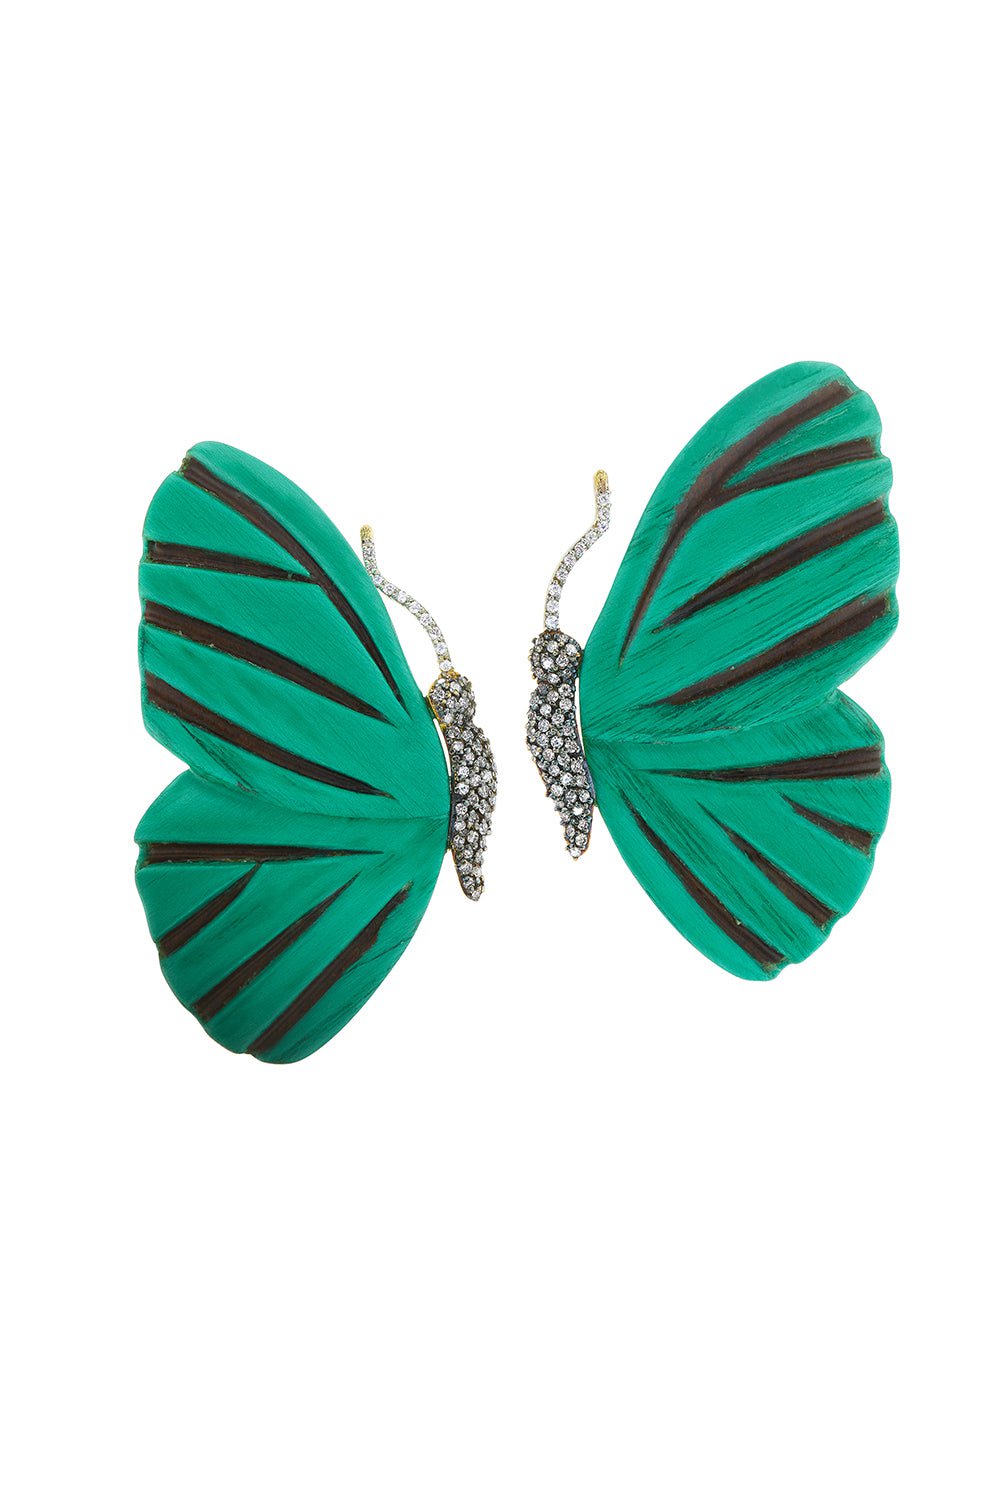 SILVIA FURMANOVICH-Marquetry Teal Butterfly Earrings-YELLOW GOLD